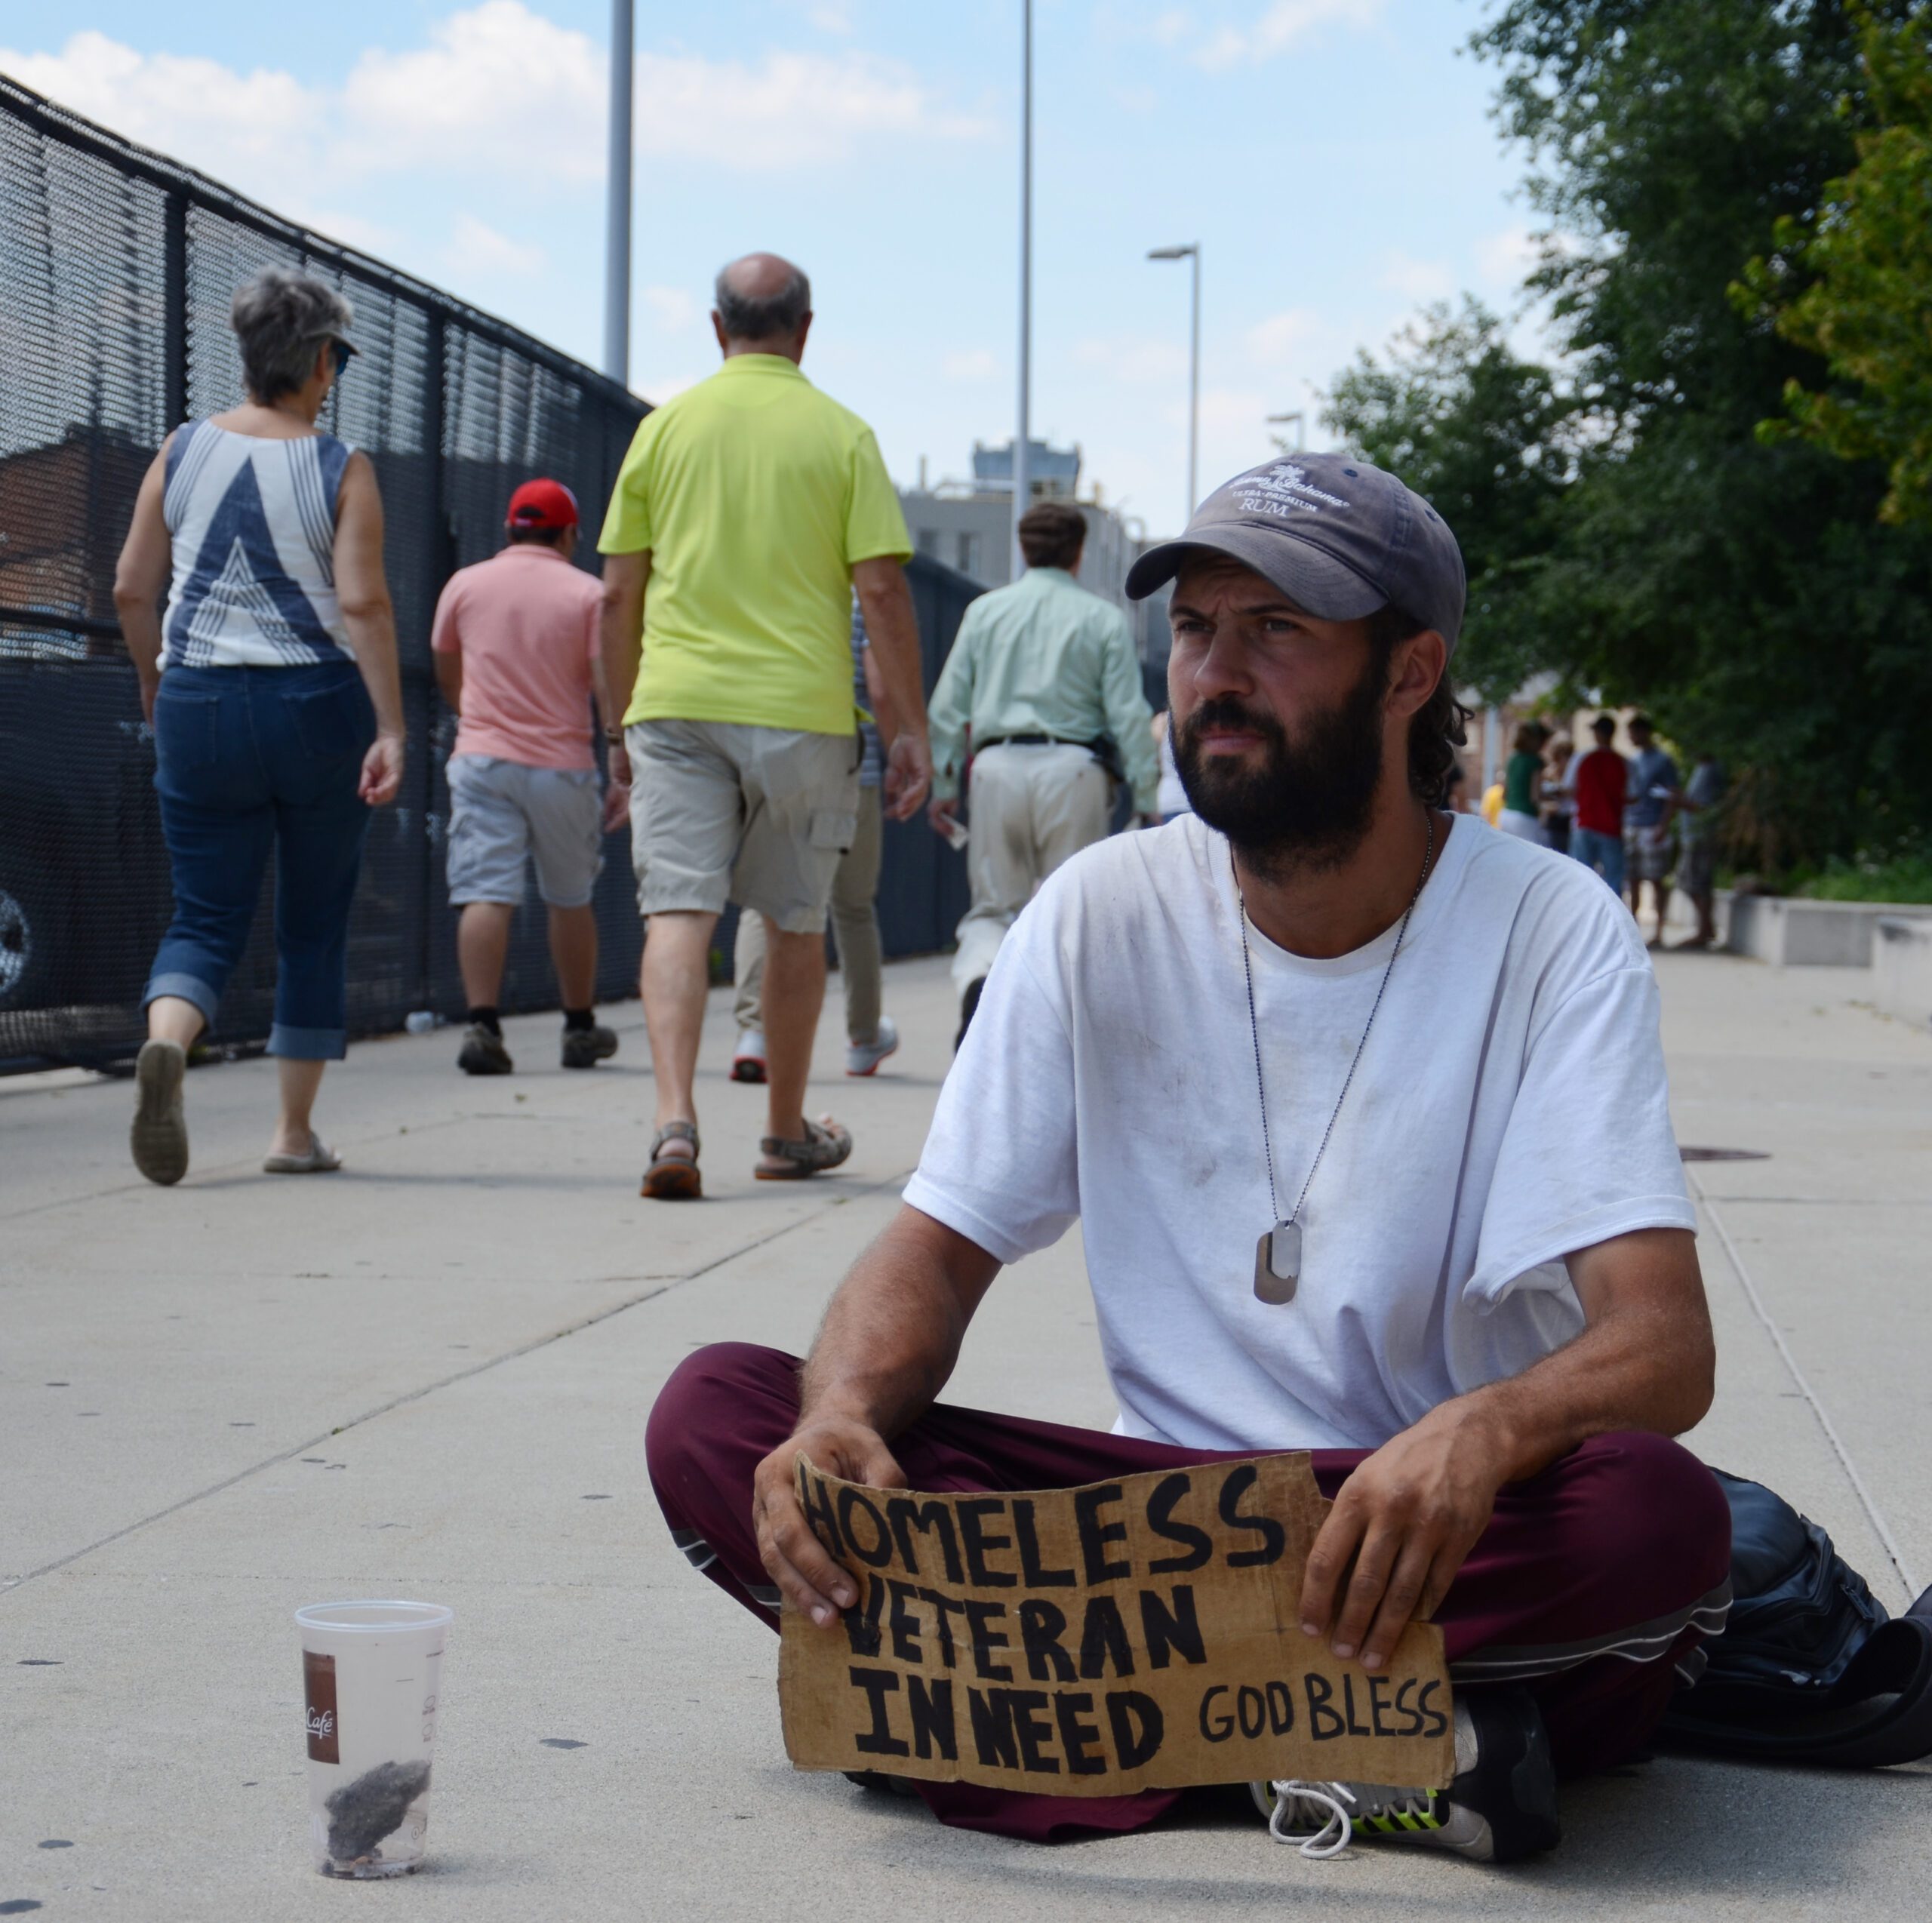 A homeless veteran asking for help on the street as people walk by.